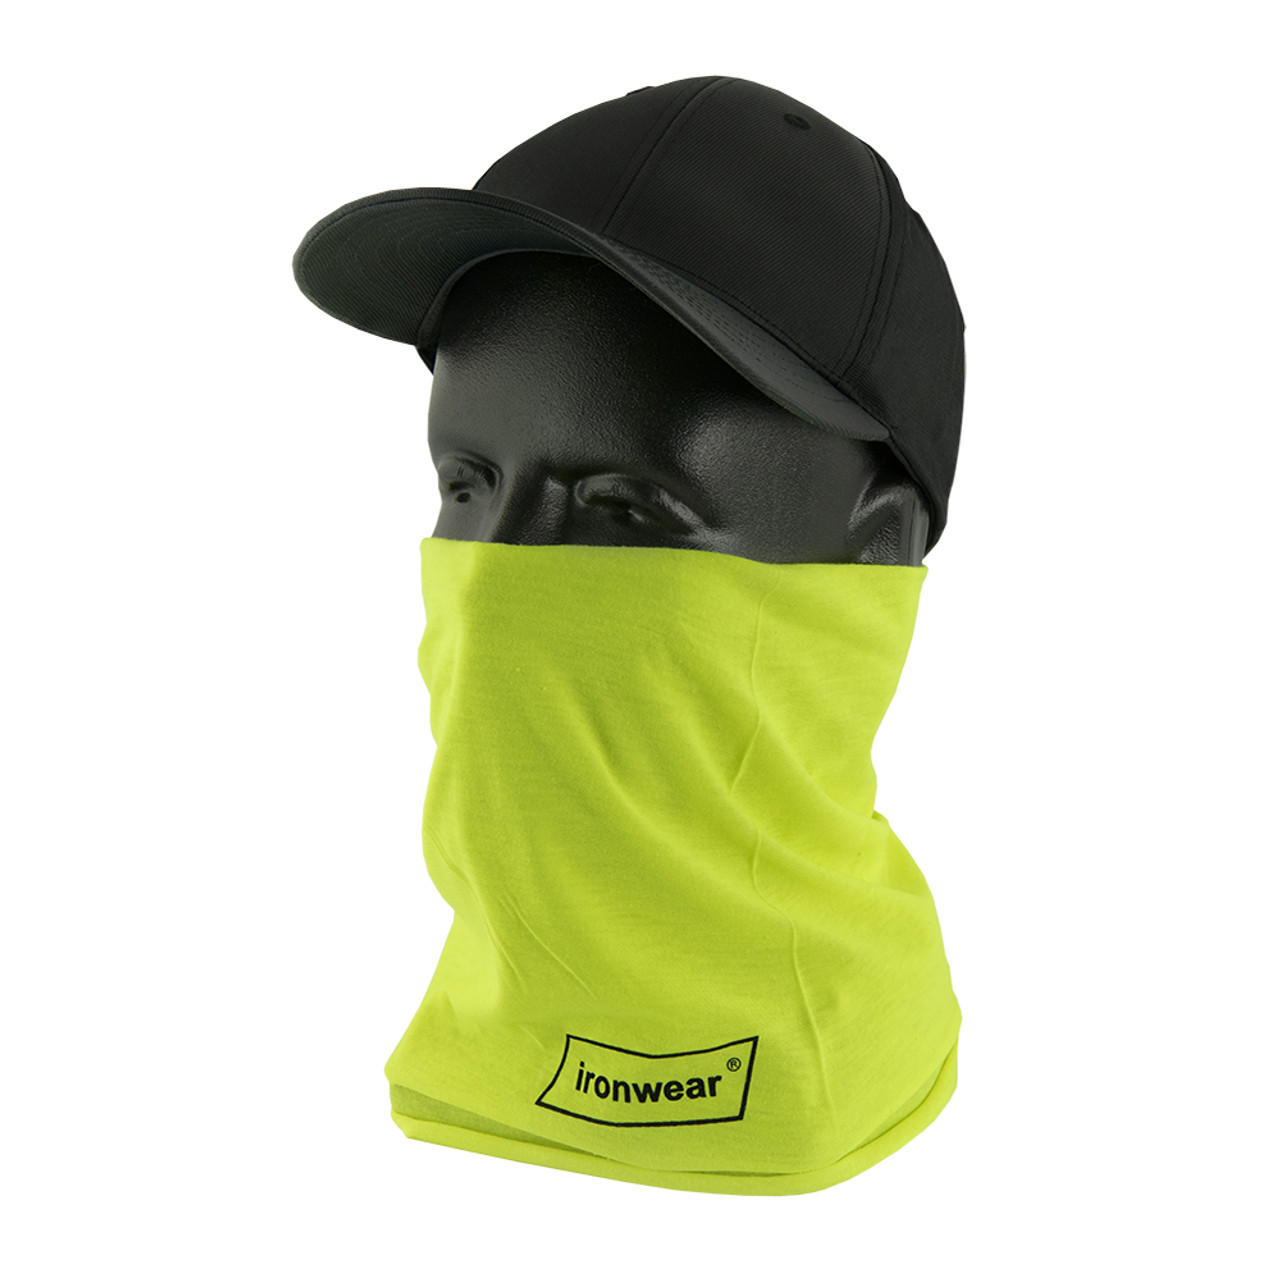 Ironwear Safety, Lime Neck Protector, High Visibility , 100